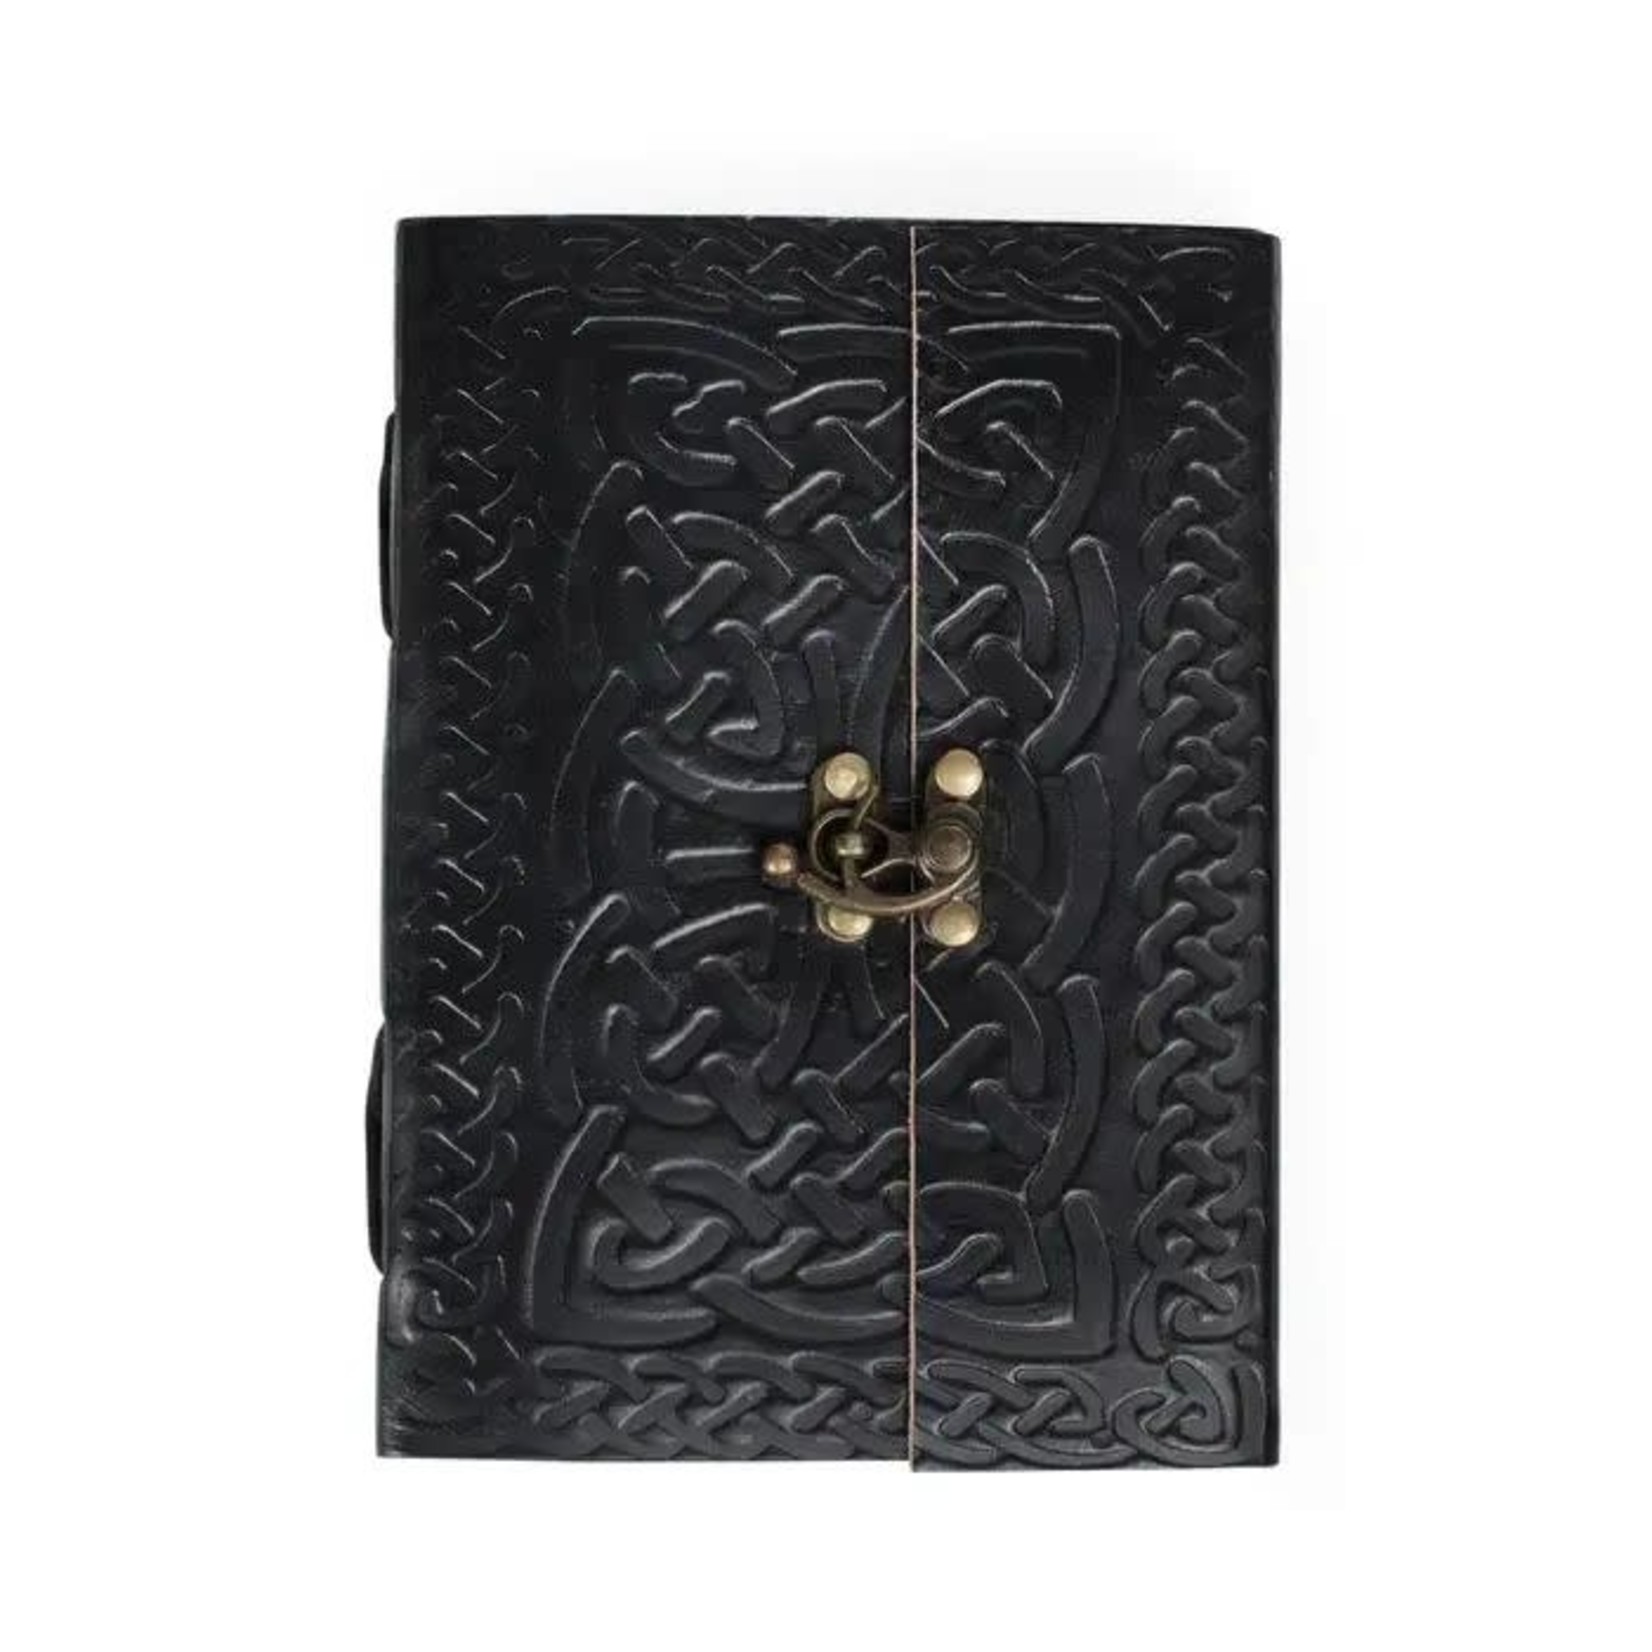 India Journal Knots W/Clasp Embossed Leather/M